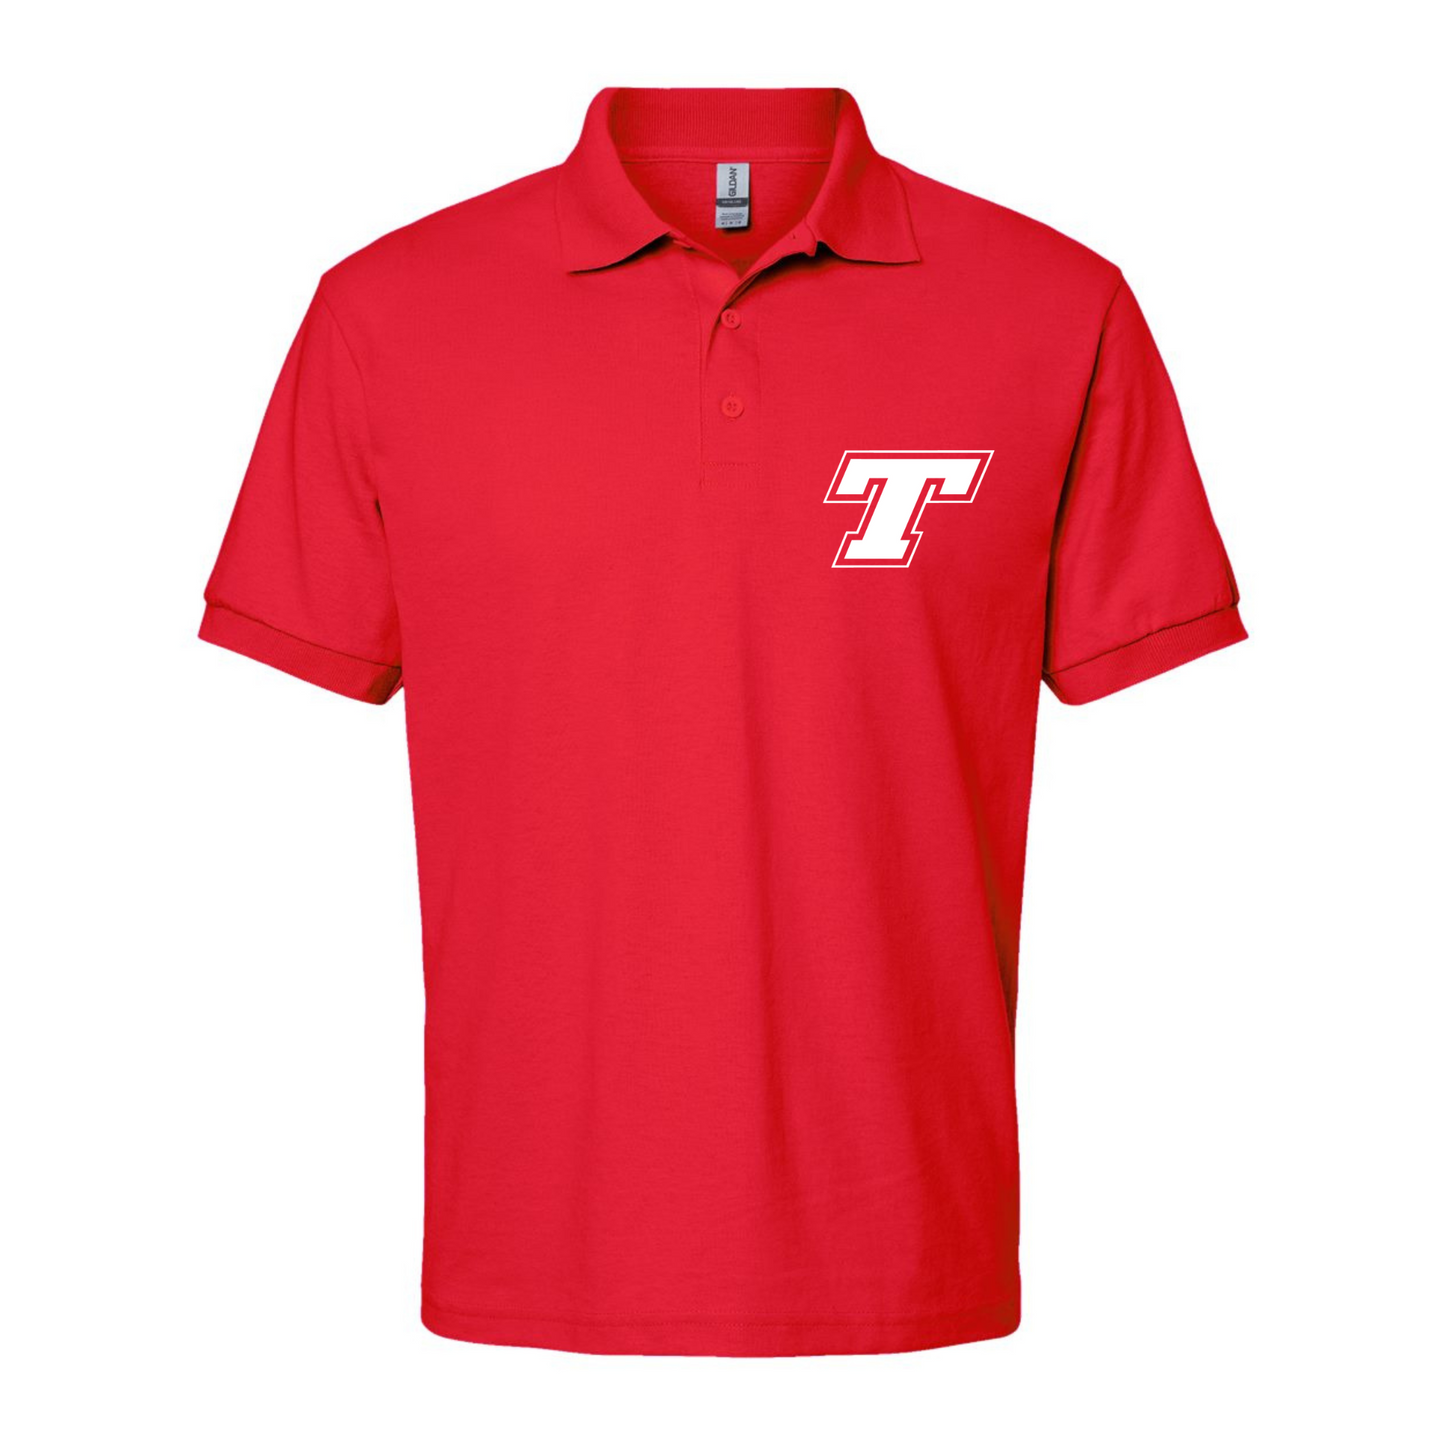 Tonganoxie Middle School Polo